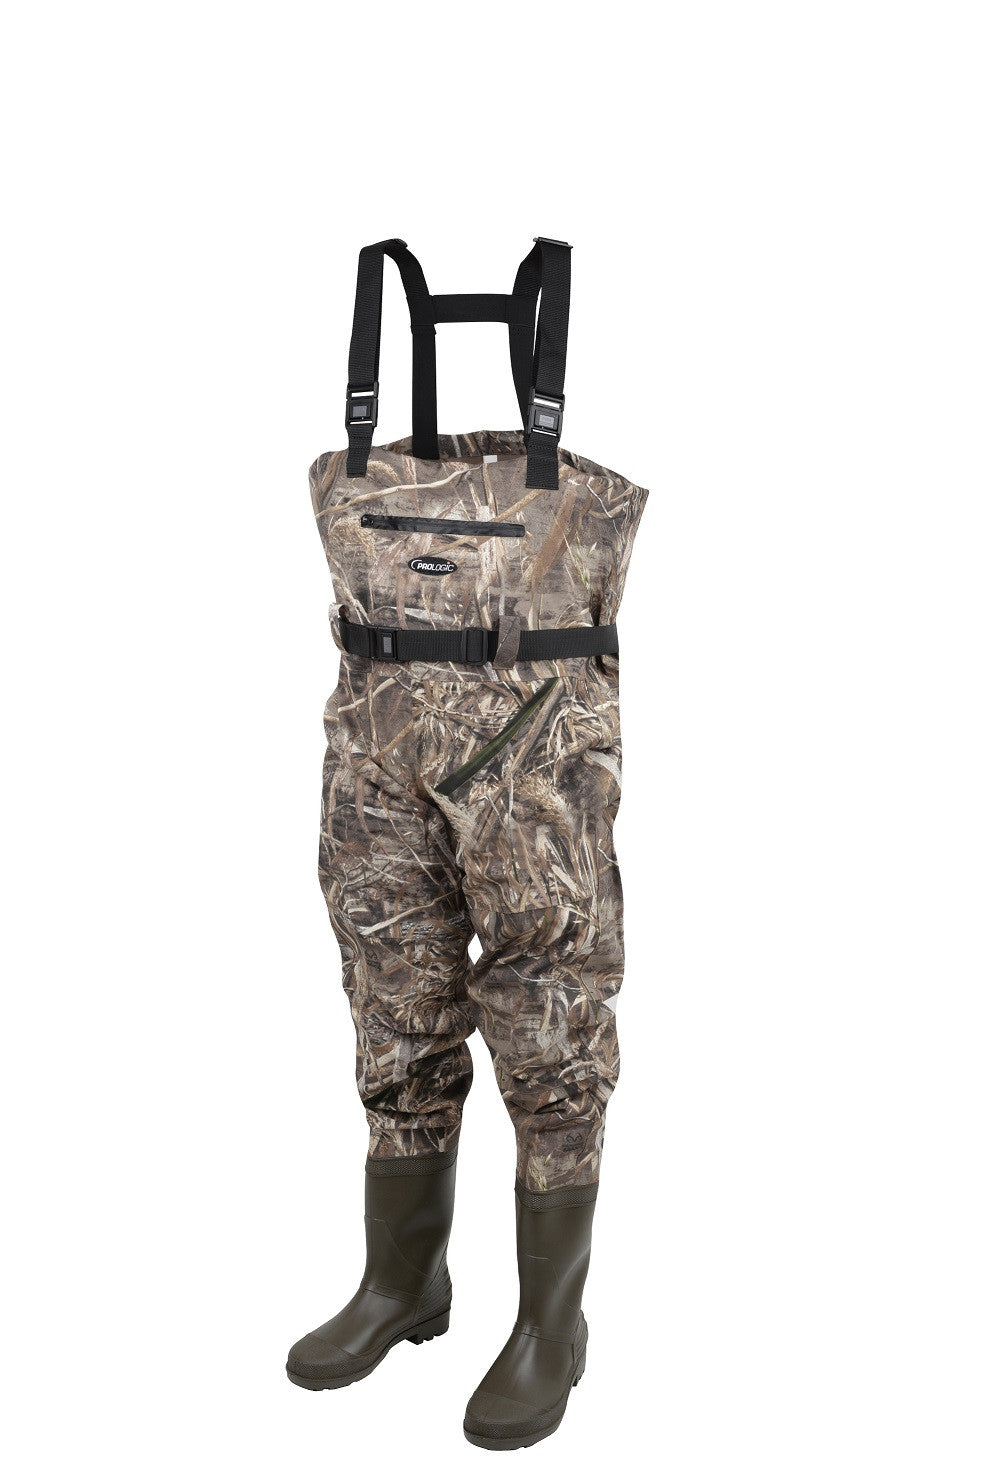 Affordable: ProLogic MAX5 XPO Neoprene Chest Waders XL 44/45-9/10